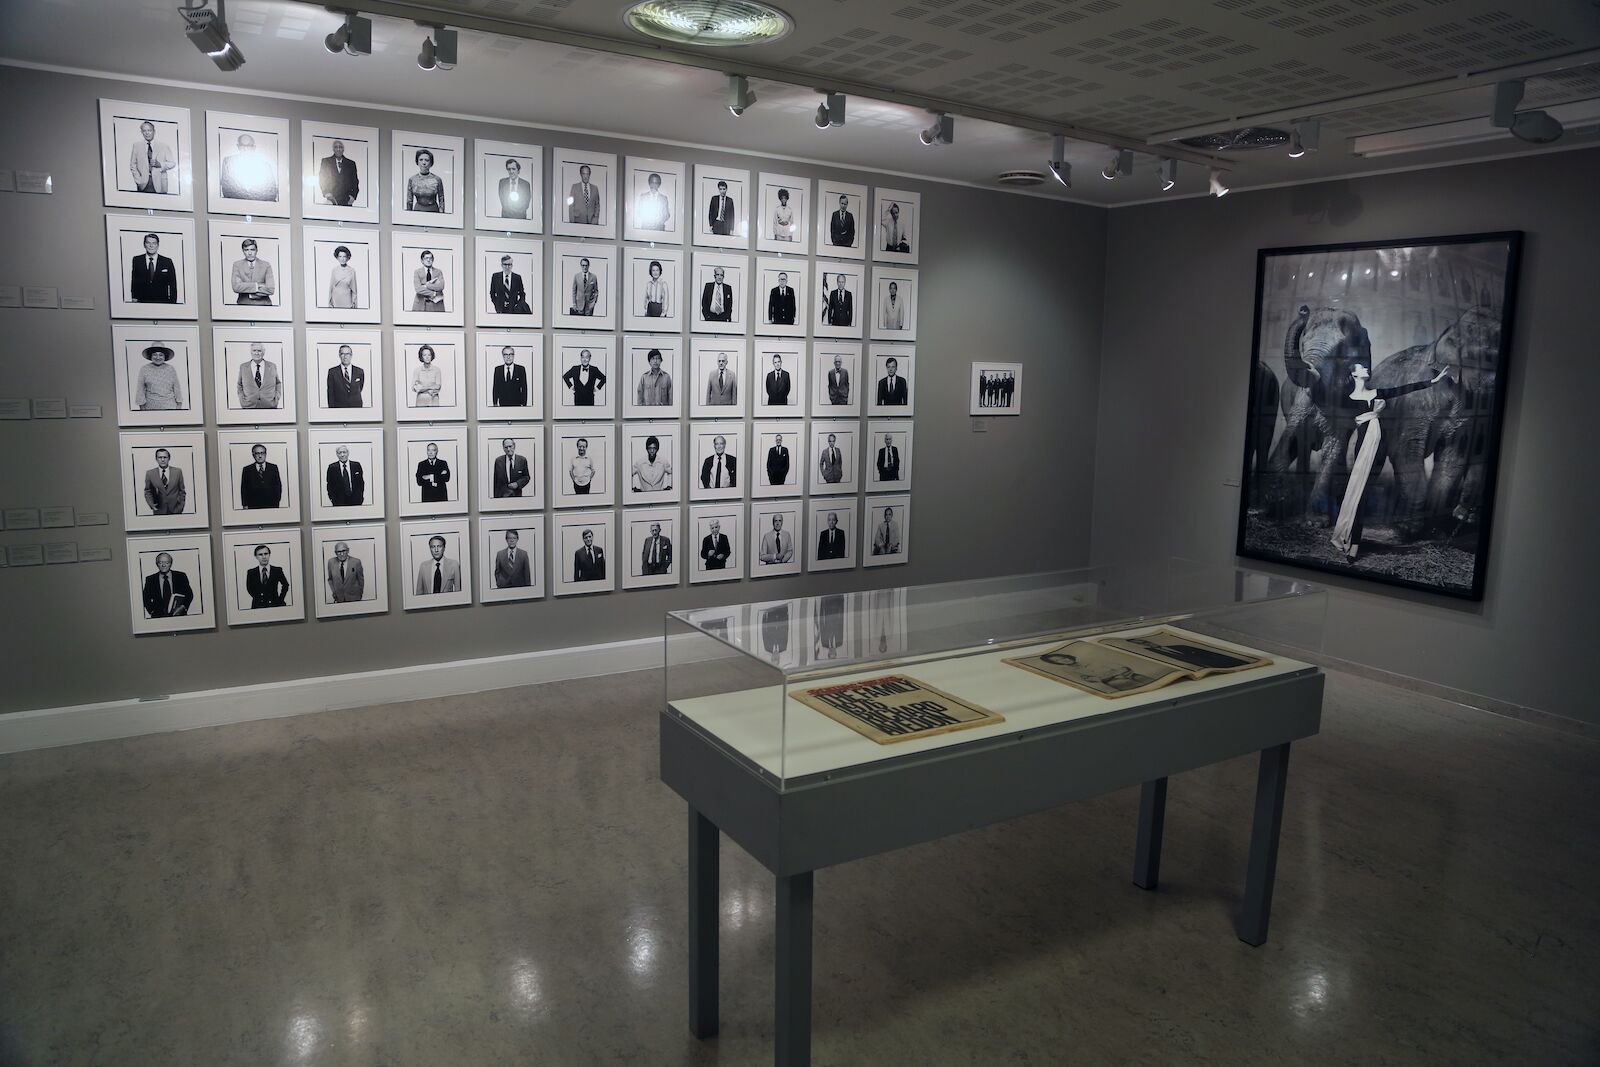 Inside the museums of photography in reykjavik, Iceland